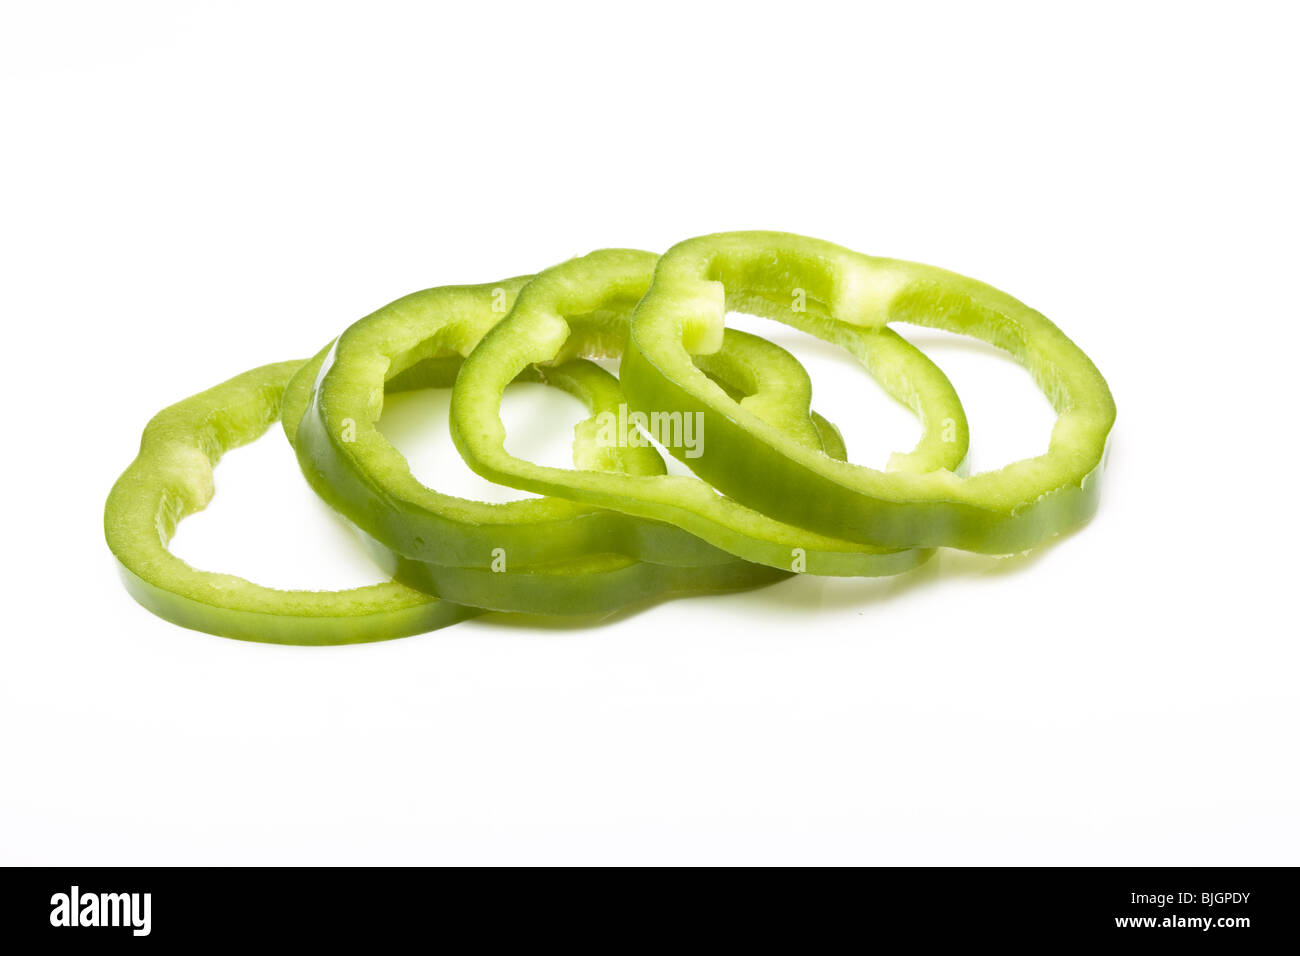 Sliced Green Peppers arranged on white background. Stock Photo